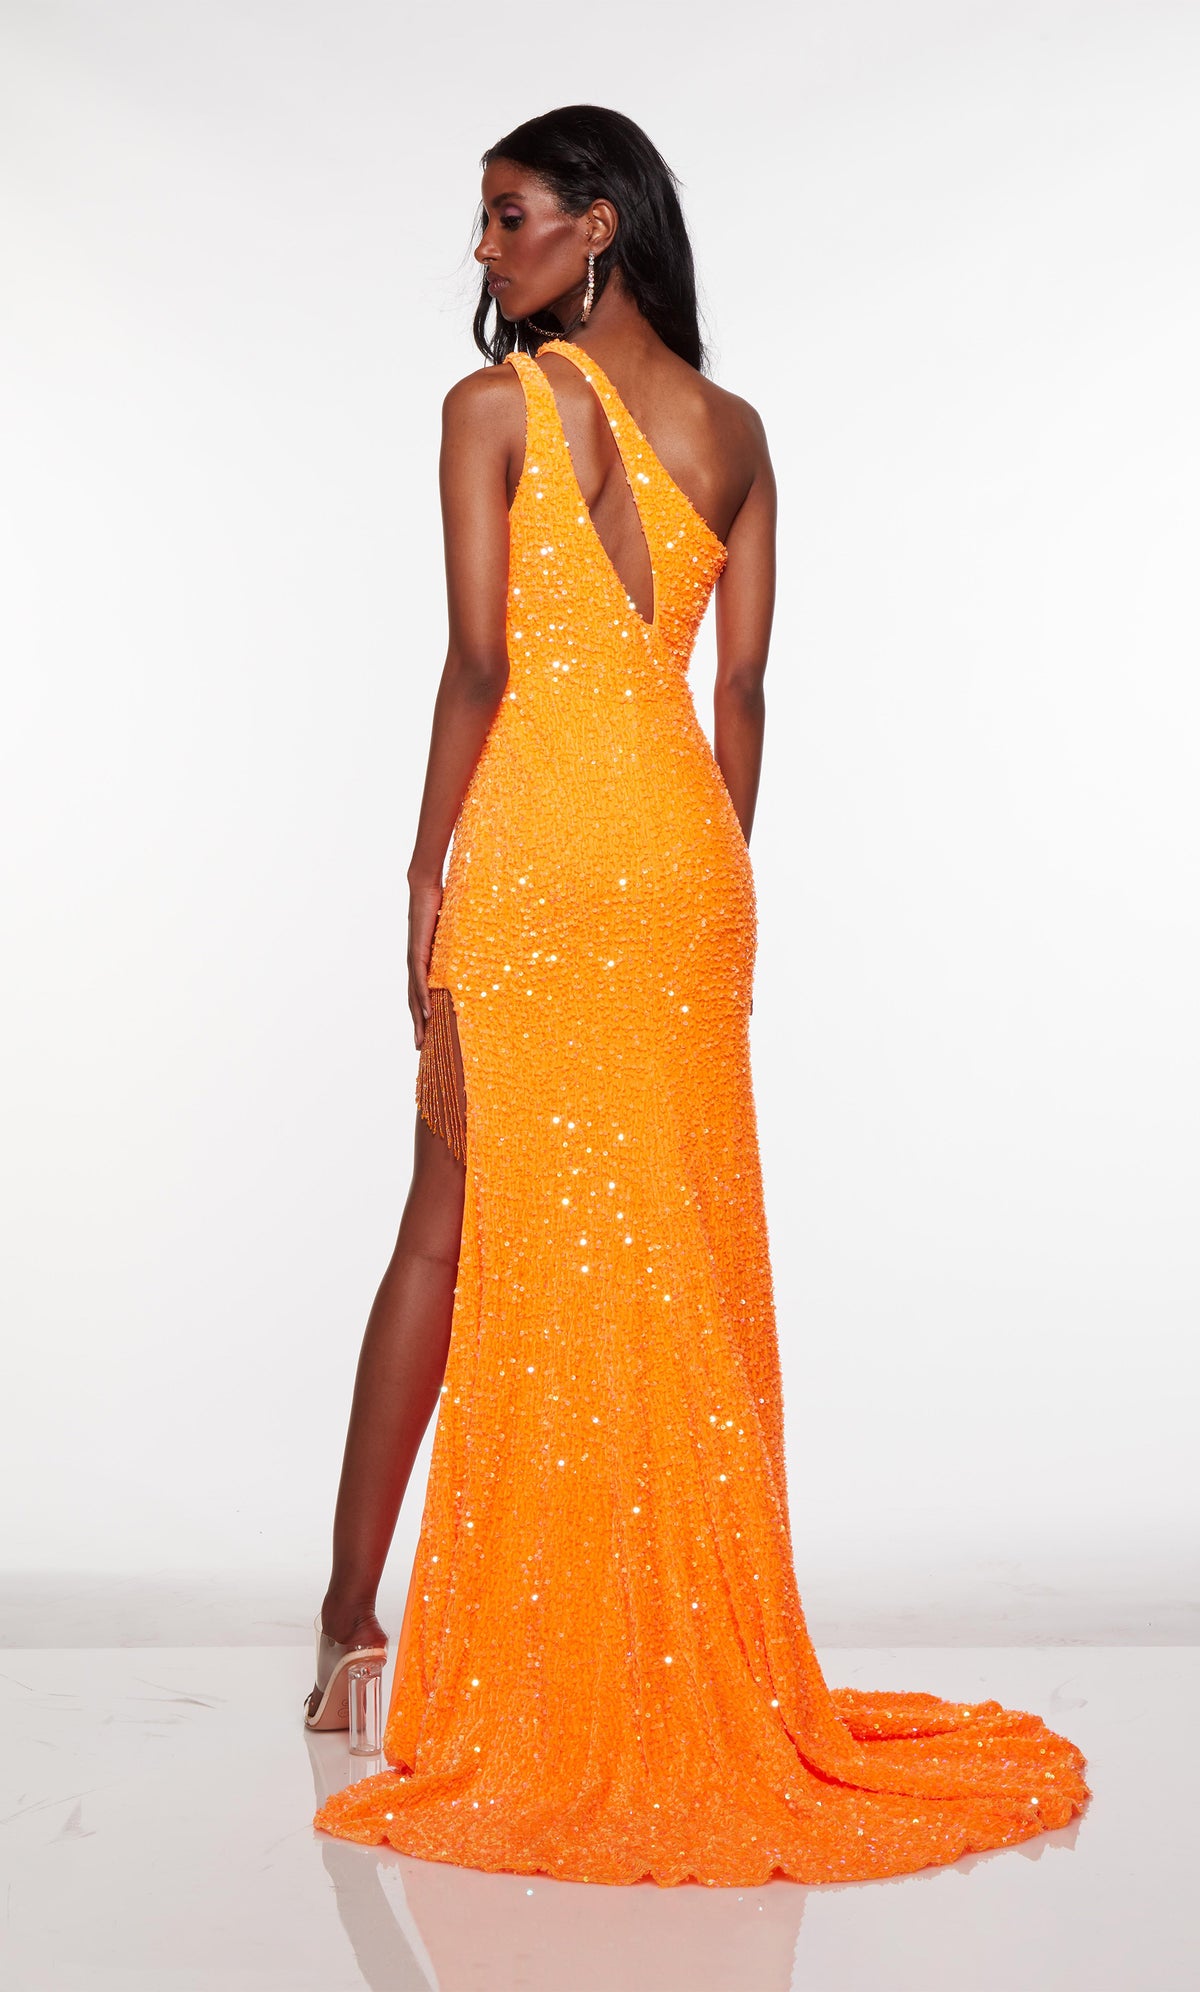 Orange one shoulder prom dress with cutout, high slit with fringe detail, and train.